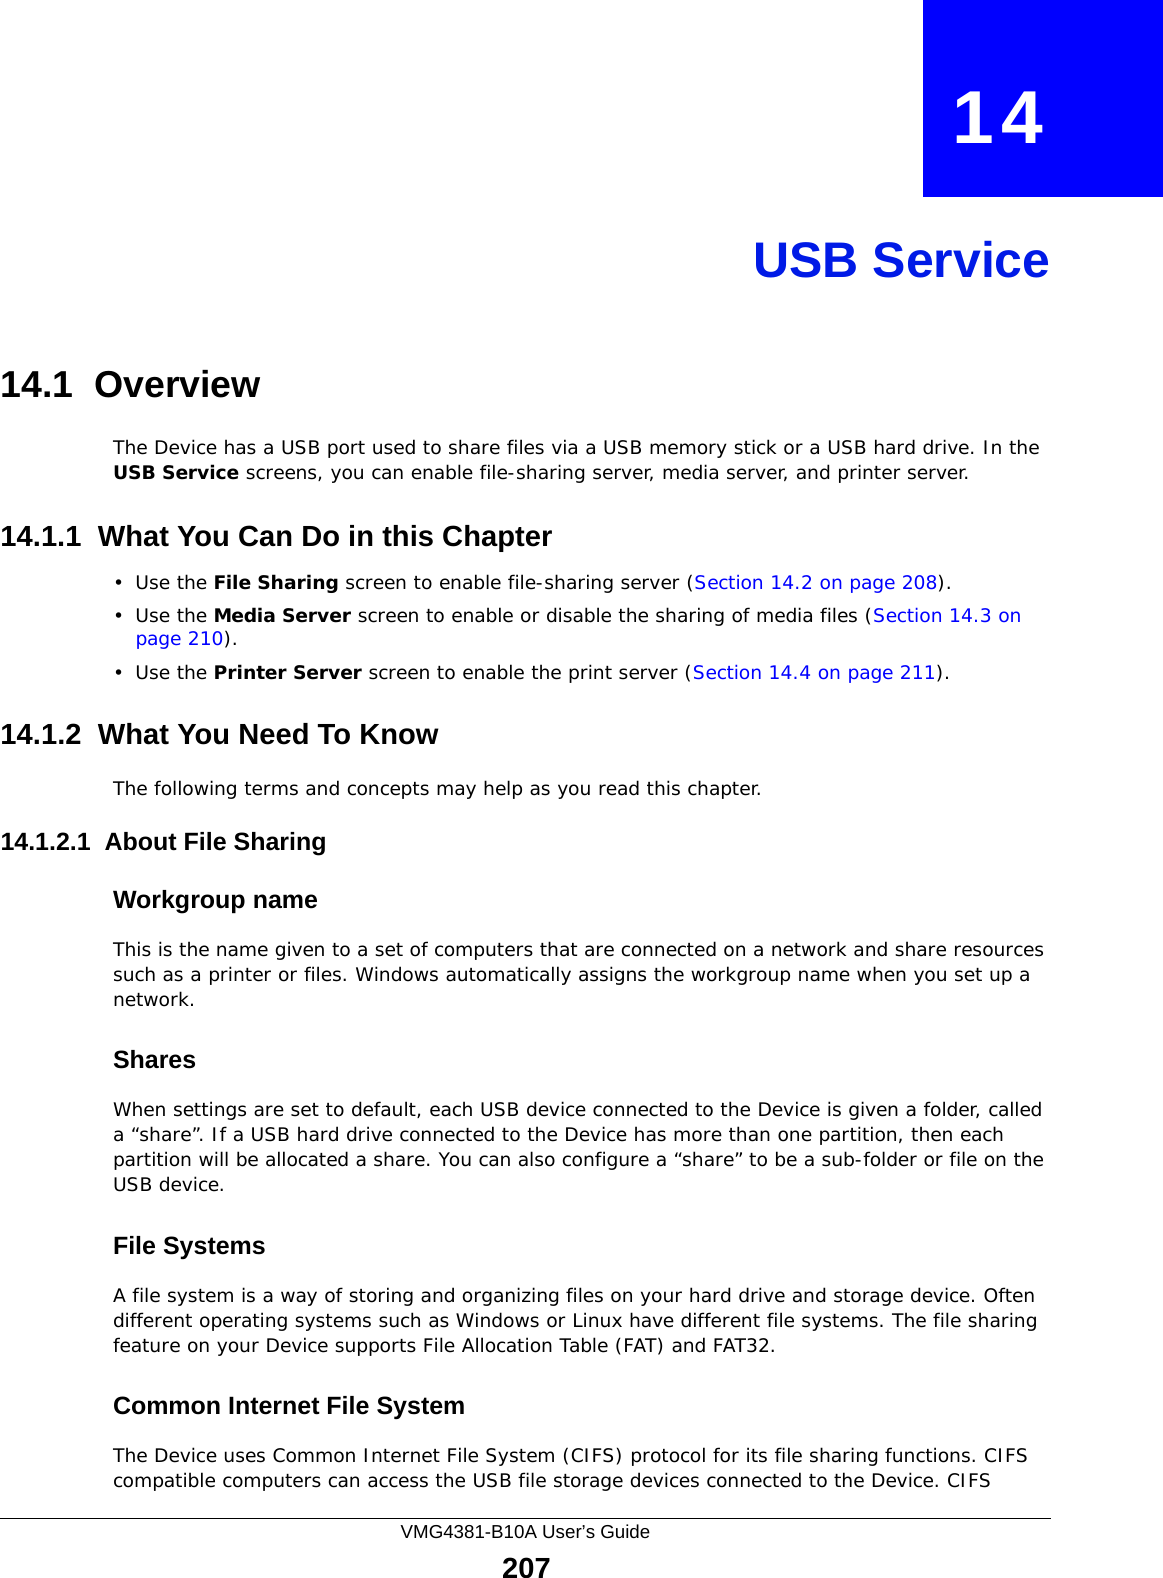 VMG4381-B10A User’s Guide207CHAPTER   14USB Service14.1  Overview The Device has a USB port used to share files via a USB memory stick or a USB hard drive. In the USB Service screens, you can enable file-sharing server, media server, and printer server.14.1.1  What You Can Do in this Chapter•Use the File Sharing screen to enable file-sharing server (Section 14.2 on page 208). •Use the Media Server screen to enable or disable the sharing of media files (Section 14.3 on page 210).•Use the Printer Server screen to enable the print server (Section 14.4 on page 211).14.1.2  What You Need To KnowThe following terms and concepts may help as you read this chapter.14.1.2.1  About File SharingWorkgroup nameThis is the name given to a set of computers that are connected on a network and share resources such as a printer or files. Windows automatically assigns the workgroup name when you set up a network. SharesWhen settings are set to default, each USB device connected to the Device is given a folder, called a “share”. If a USB hard drive connected to the Device has more than one partition, then each partition will be allocated a share. You can also configure a “share” to be a sub-folder or file on the USB device.File SystemsA file system is a way of storing and organizing files on your hard drive and storage device. Often different operating systems such as Windows or Linux have different file systems. The file sharing feature on your Device supports File Allocation Table (FAT) and FAT32. Common Internet File SystemThe Device uses Common Internet File System (CIFS) protocol for its file sharing functions. CIFS compatible computers can access the USB file storage devices connected to the Device. CIFS 